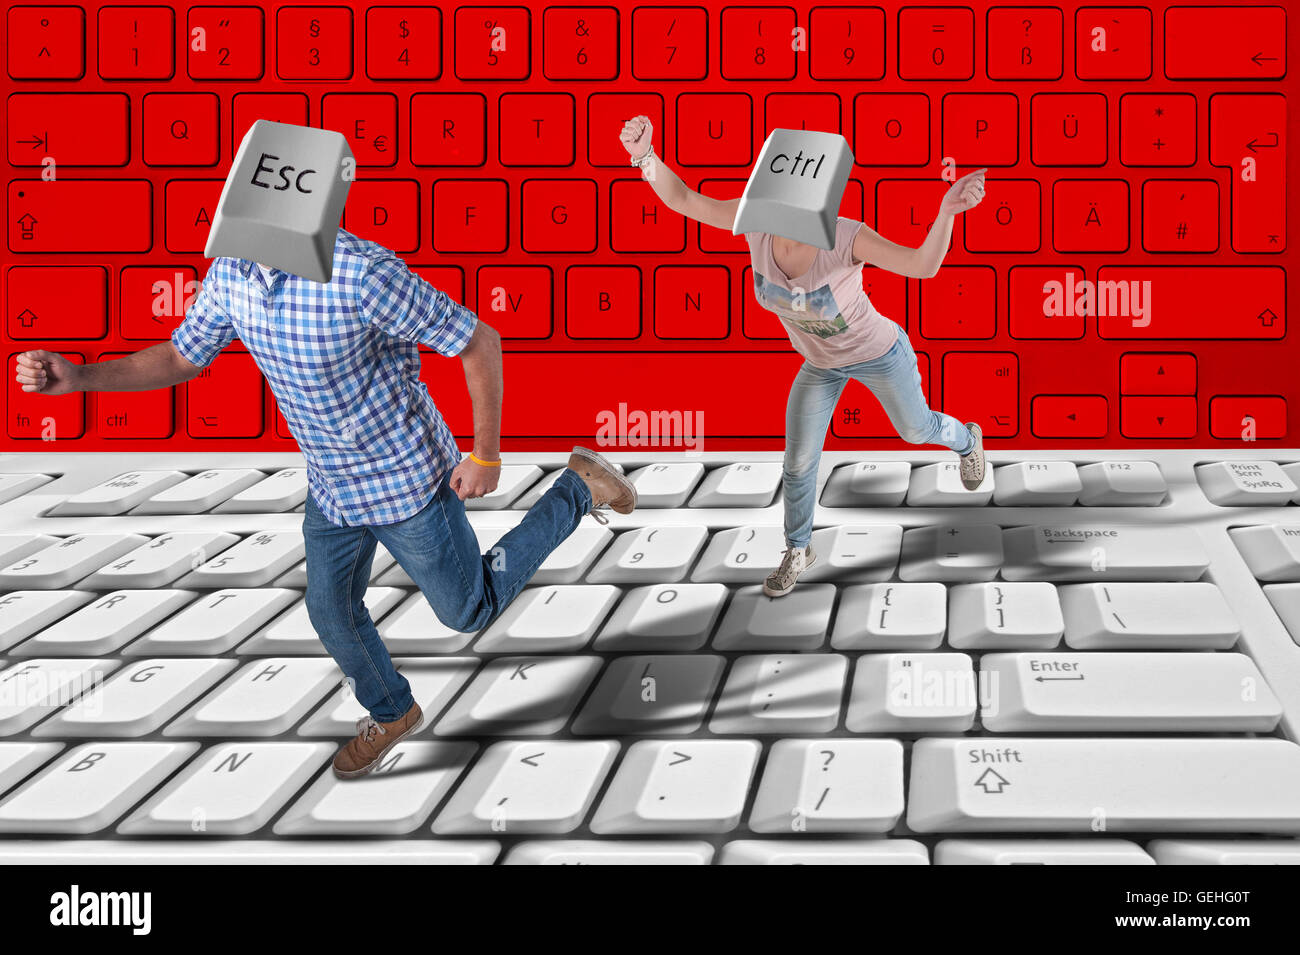 Woman with a control key as a head chases a man with a escape key as a head with a big keyboard on the floor Stock Photo